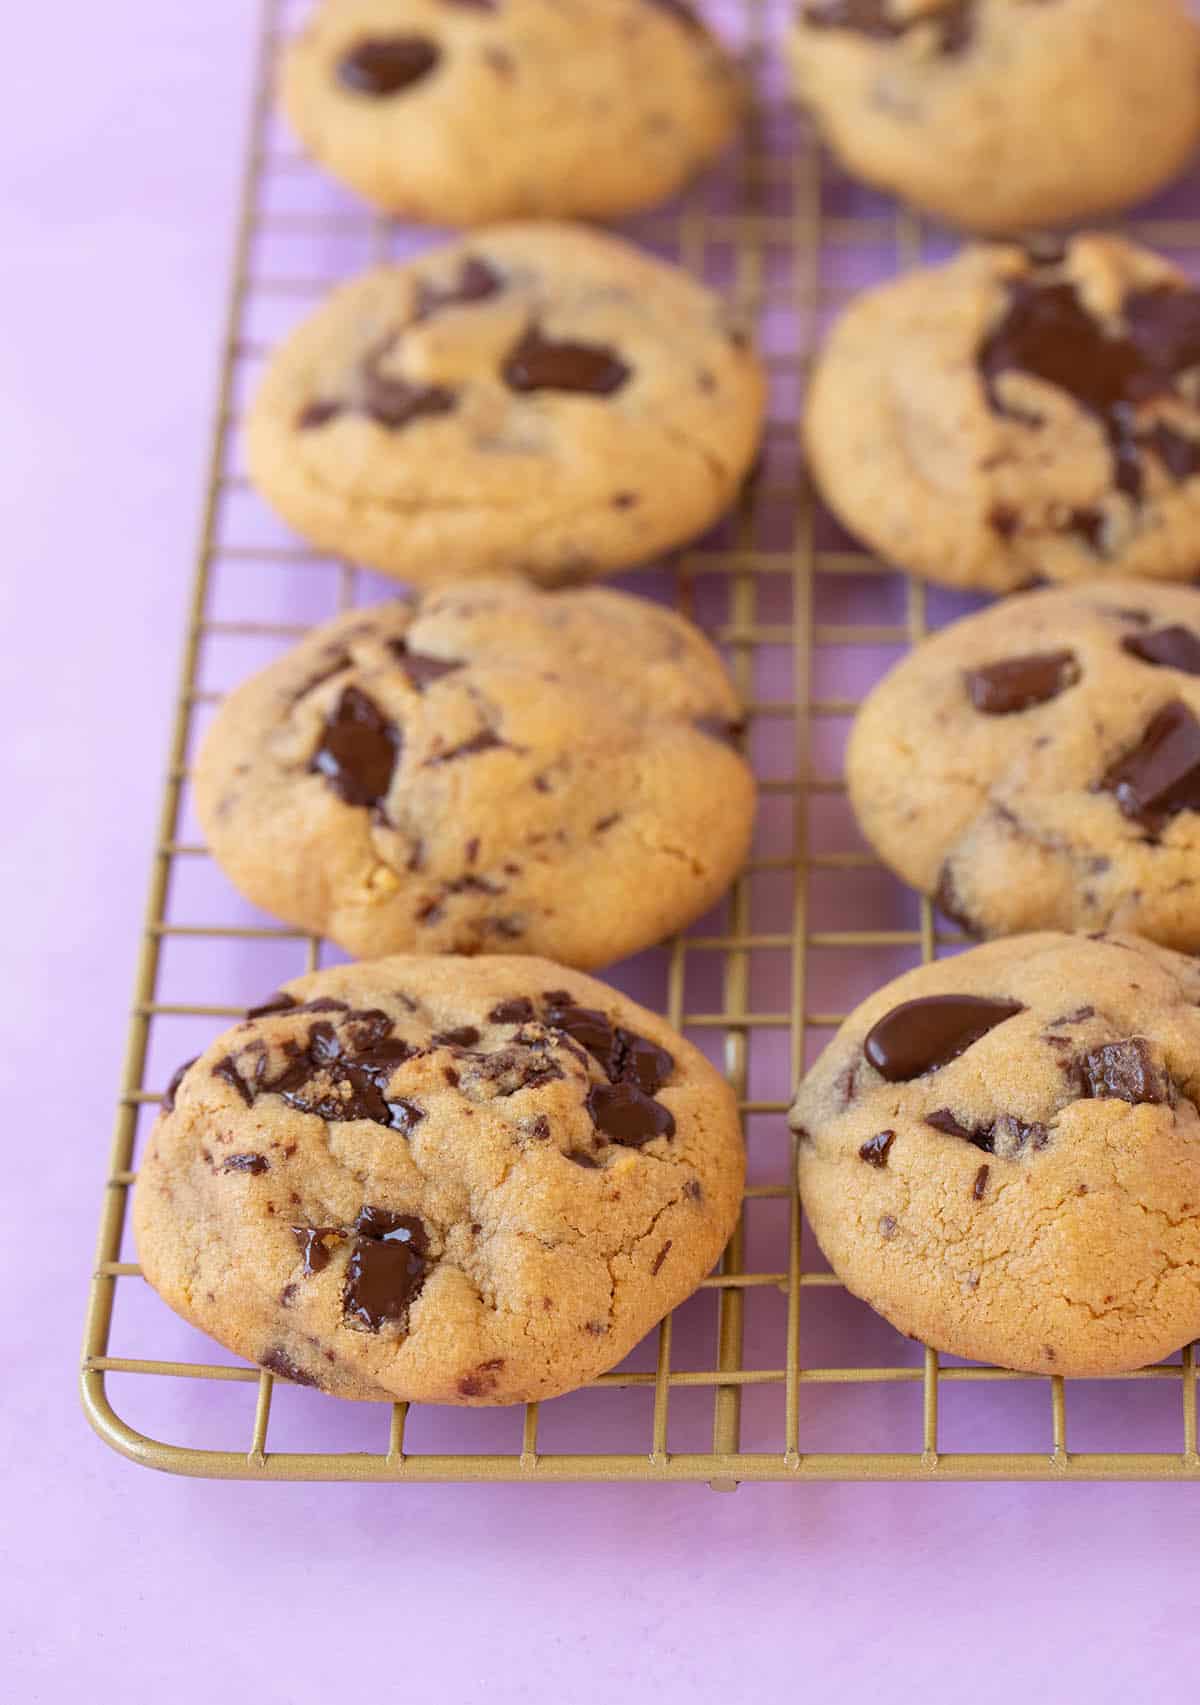 A plate of Peanut Butter Chocolate Chip Cookies cooling on a wire rack.